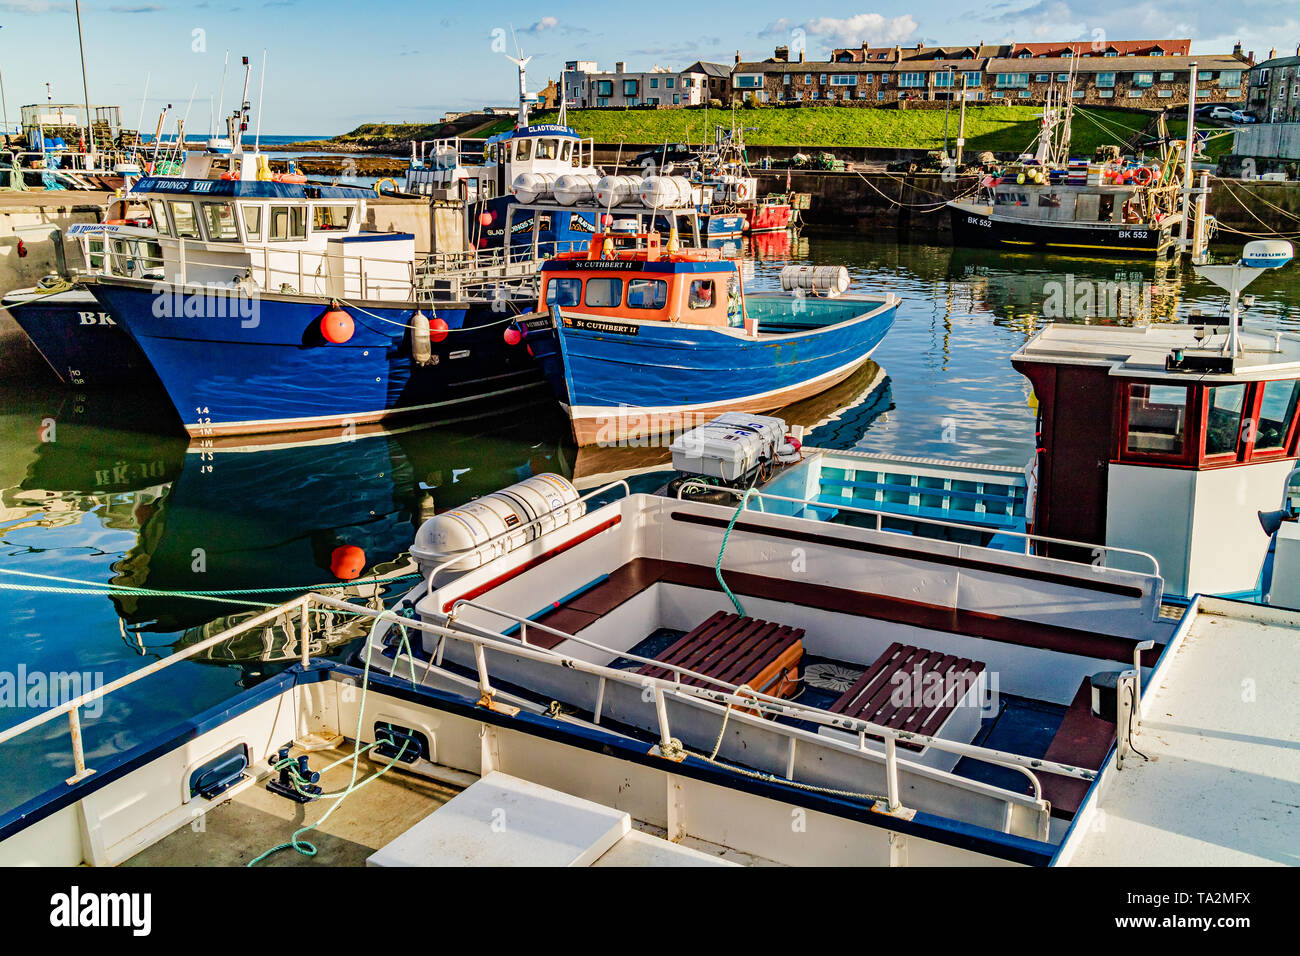 Fishing boats and leisure boats for trips to the Farne Islands in North Sunderland harbour, Seahouses, Northumberland, UK. September 2018. Stock Photo